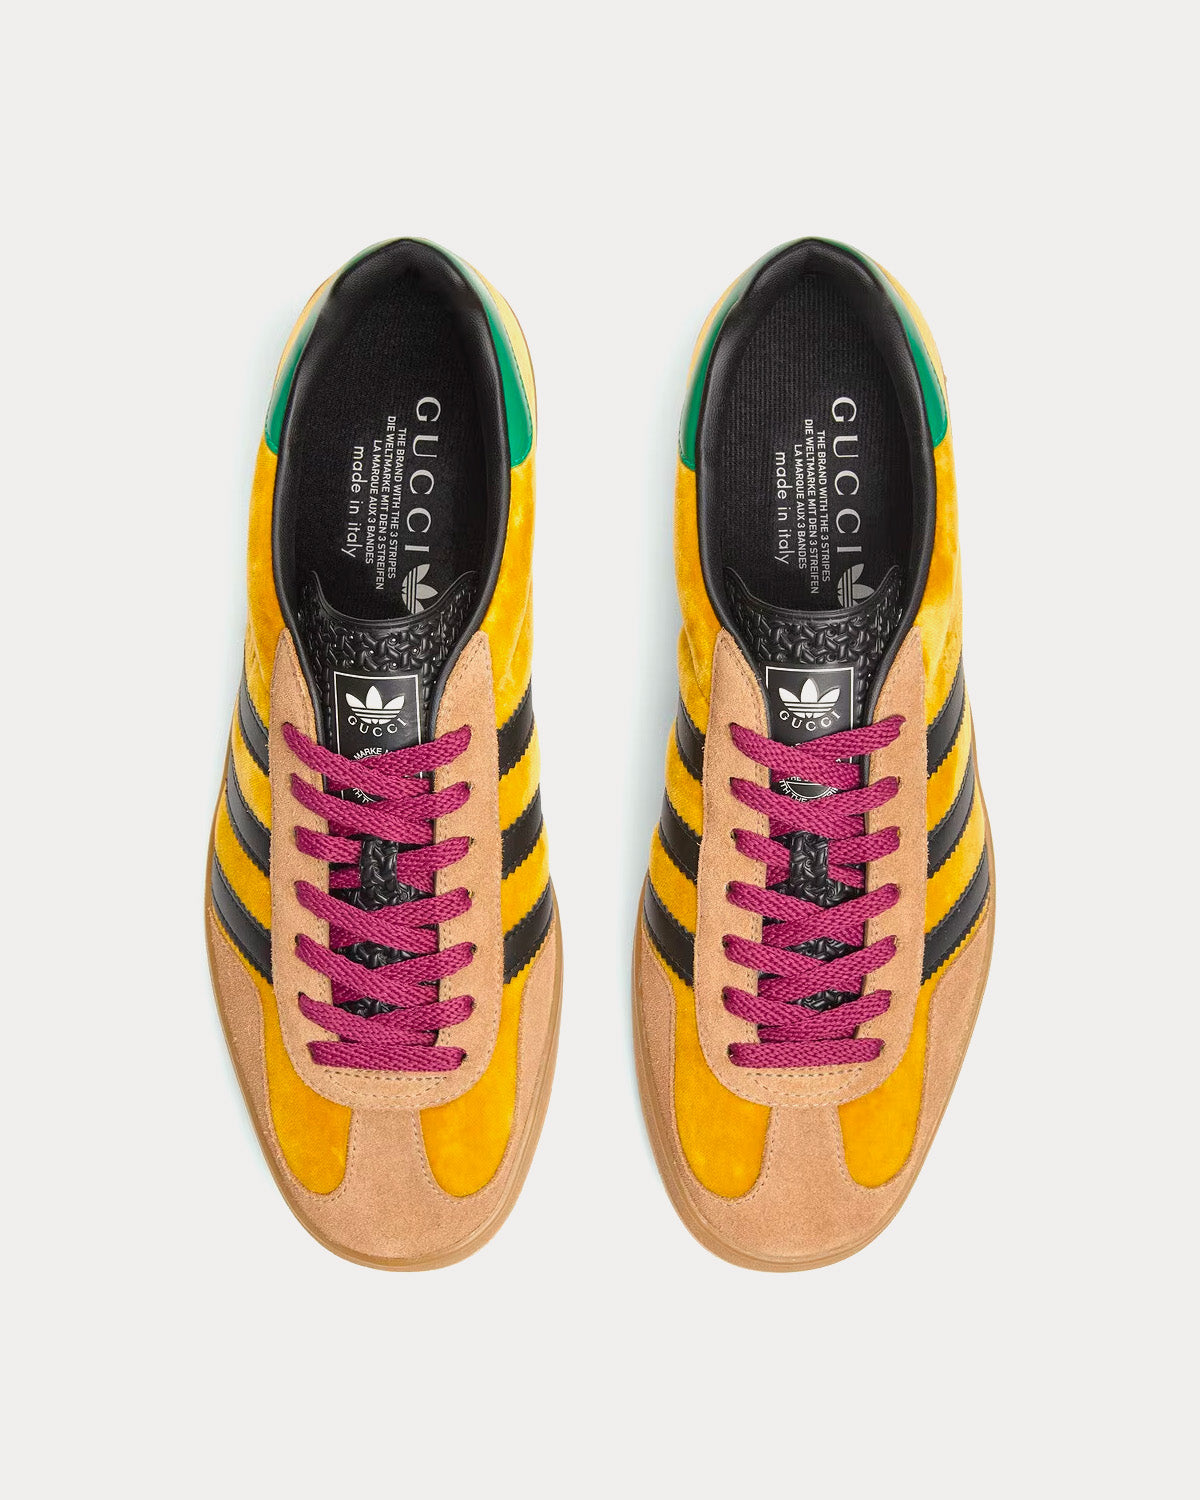 Adidas x Gucci - Gazelle Yellow velvet with Beige Suede Low Top Sneakers